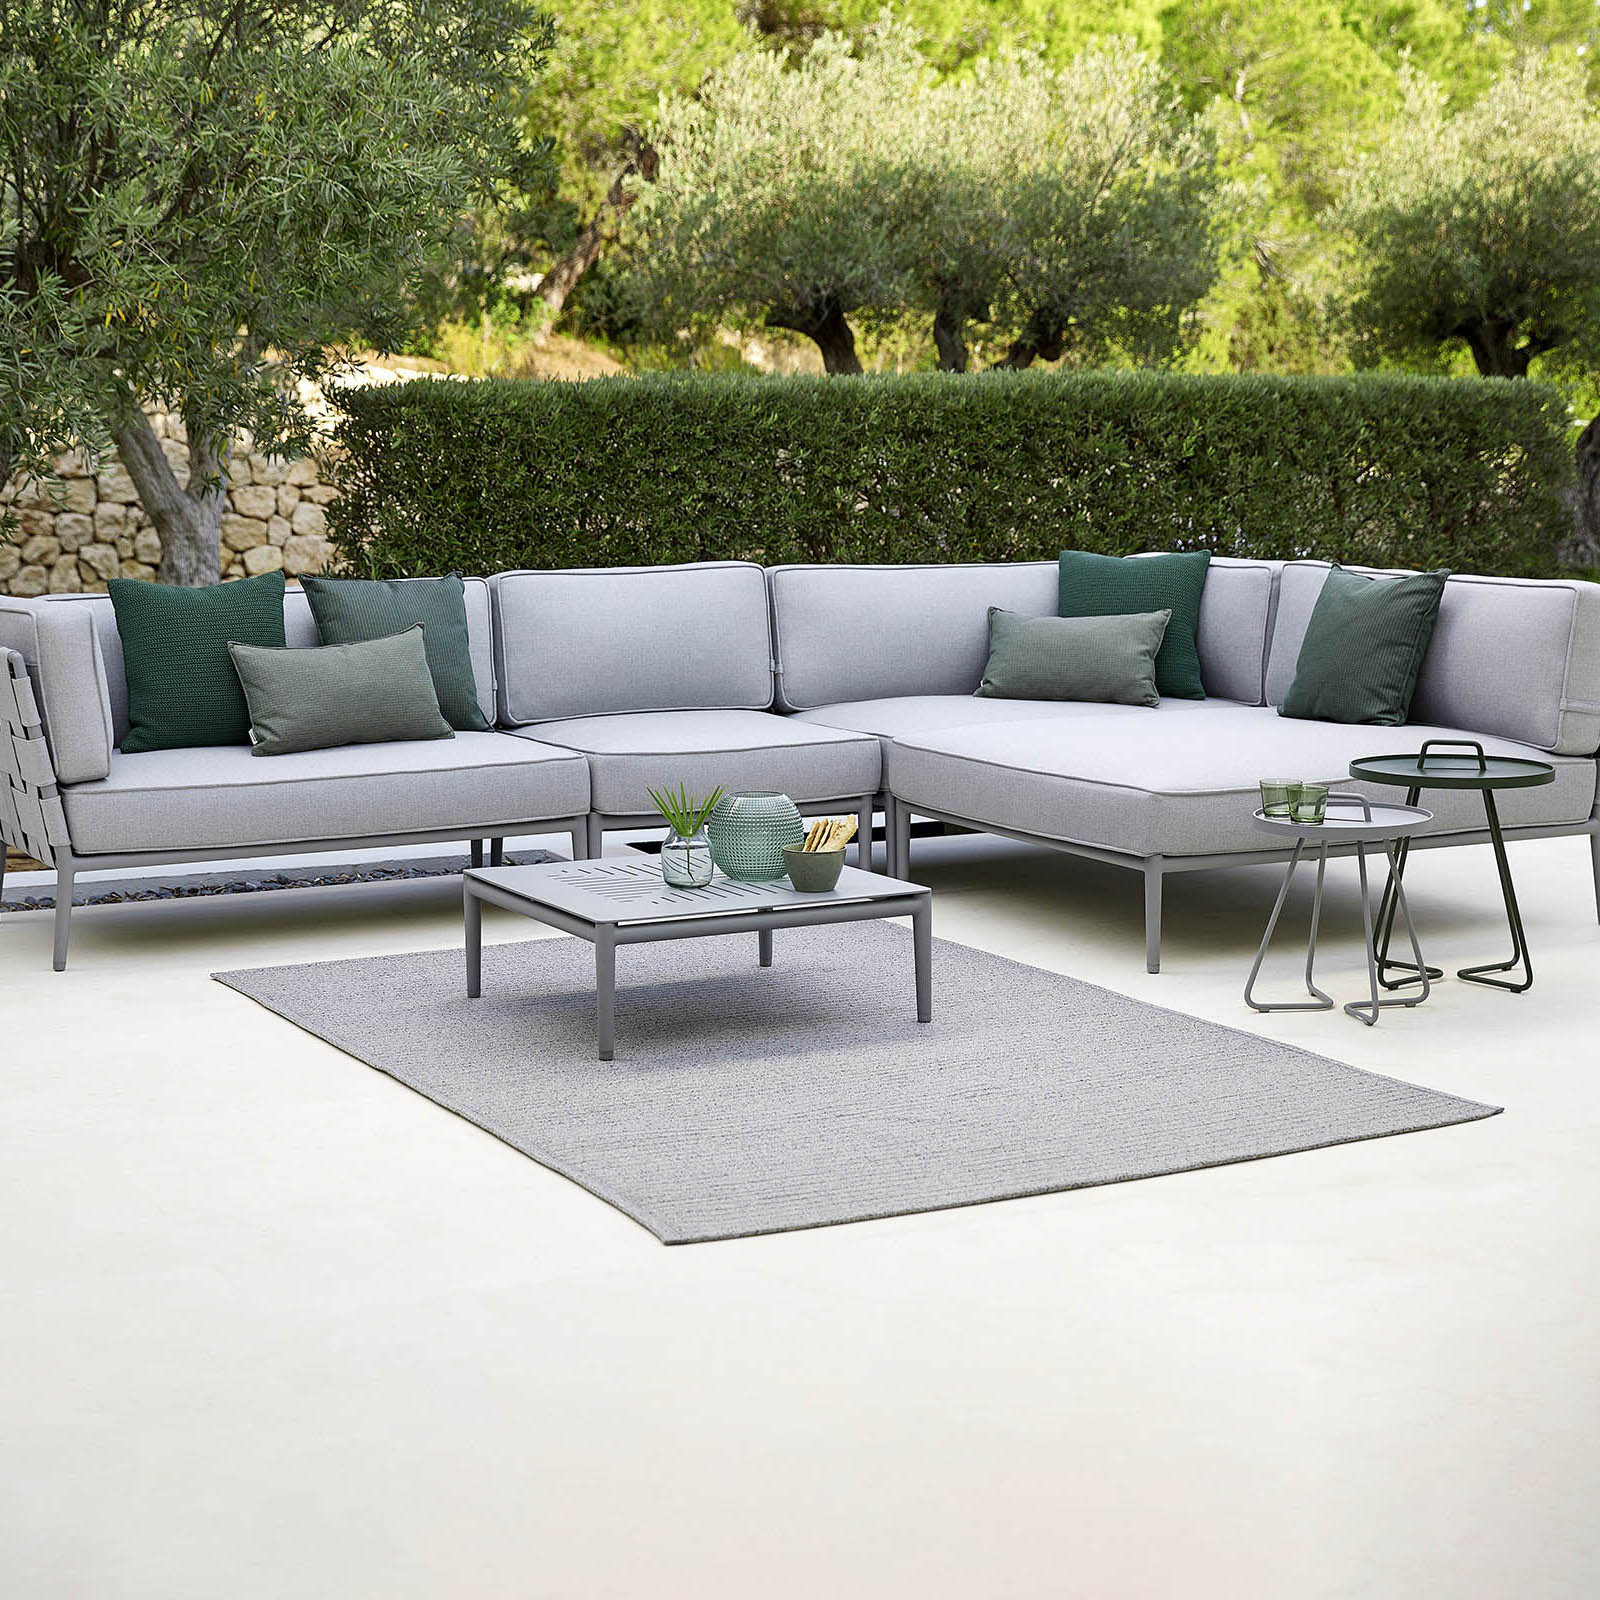 Conic 2-Sitzer Sofa-Modul rechts aus Cane-line AirTouch mit QuickDry in Light Grey